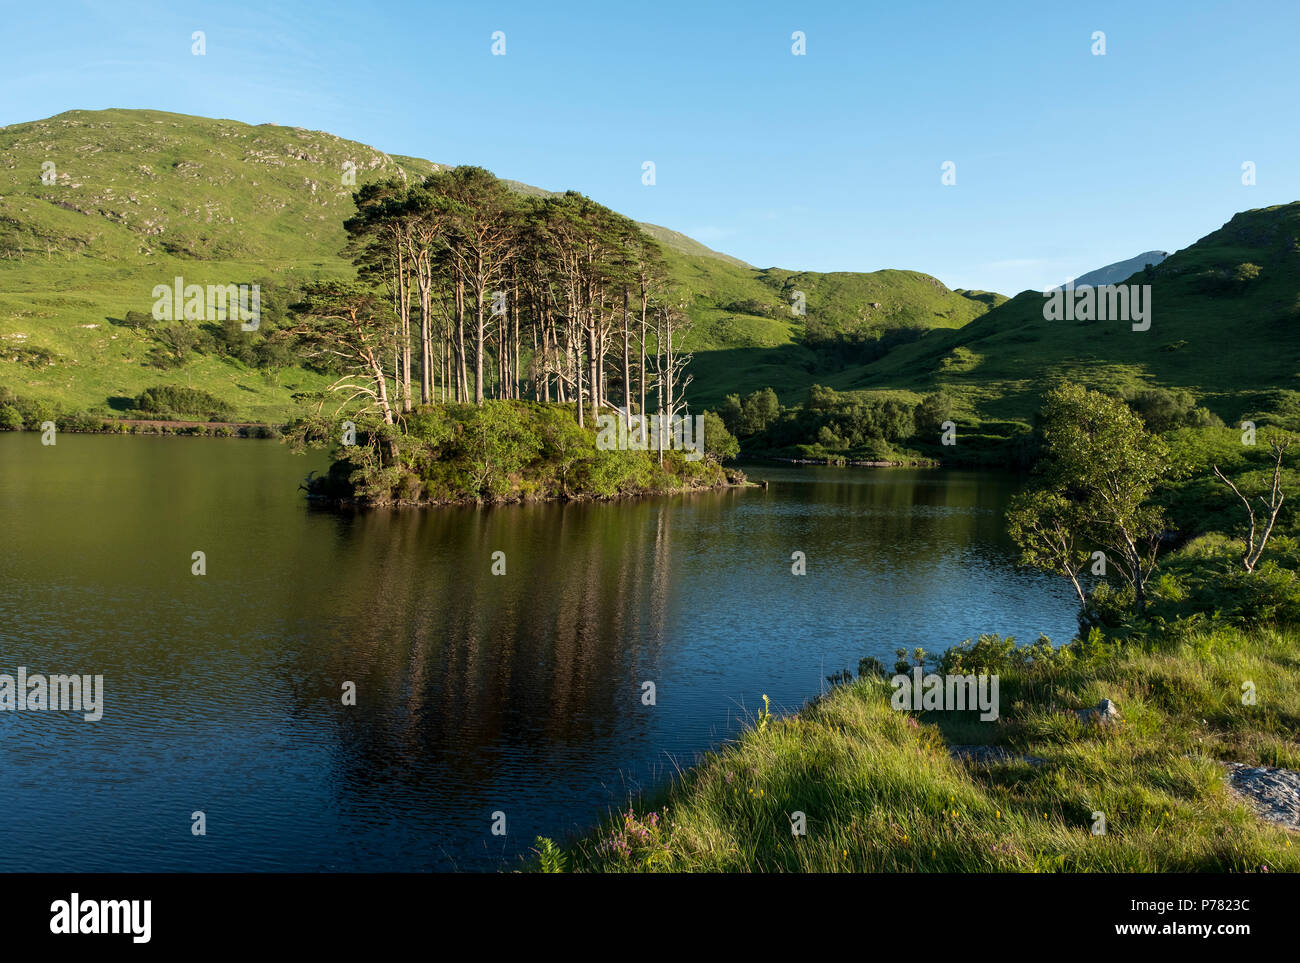 Eilean na Moine island, Loch Eilt, Lochaber, Scotland. This small island was used as a location in the Harry Potter the Chamber of Secrets. Stock Photo